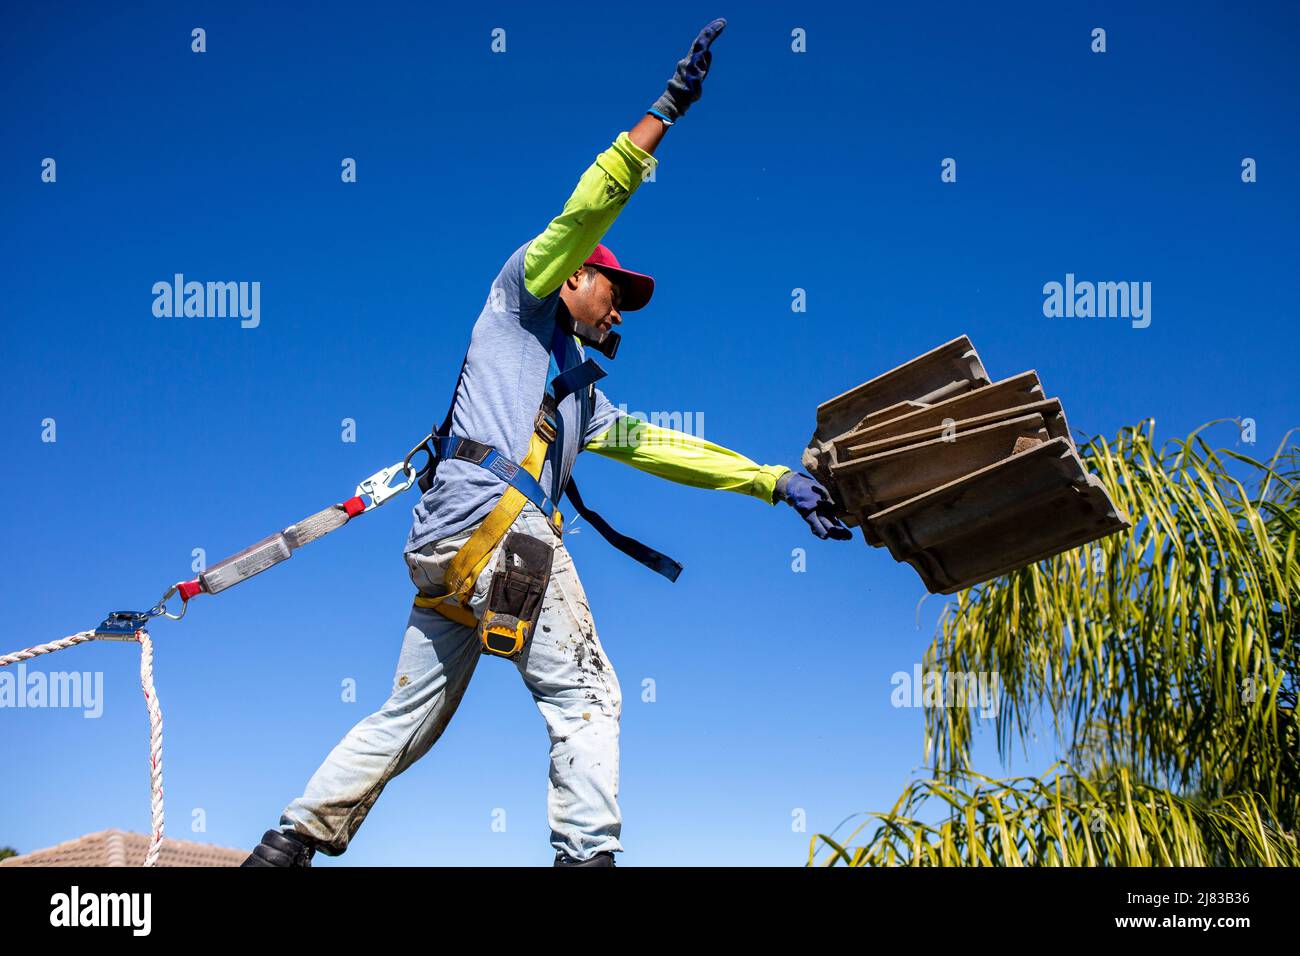 Roofer dismantling old roof tiles and throwing them into a dumpster before fixing the roof and reinstalling tar rolls and roof tiles pending inspecton Stock Photo